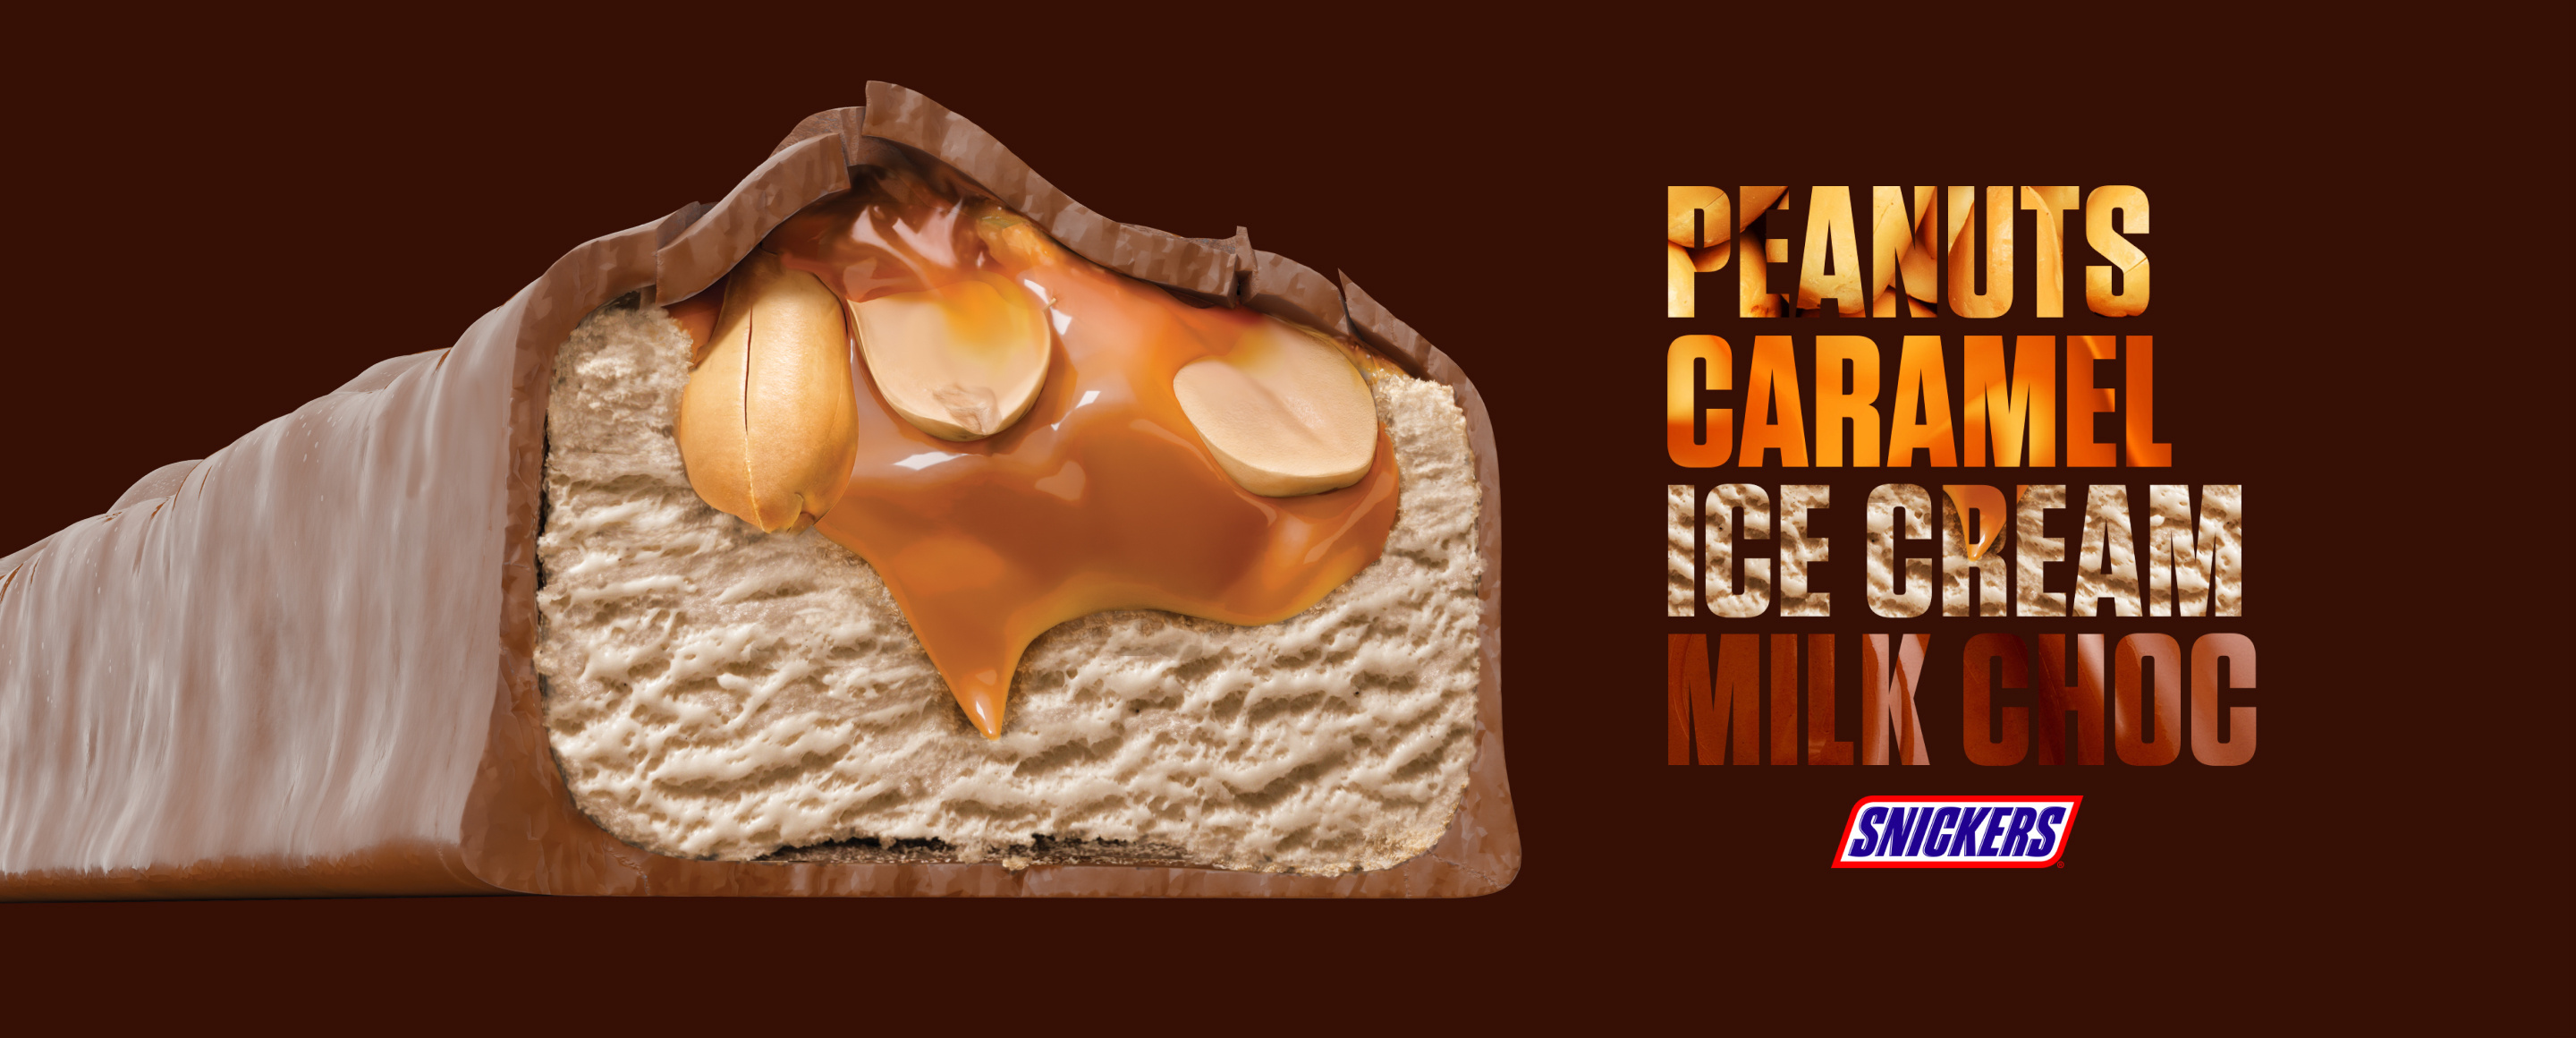 Cross-section view of Snickers ice cream bar with ingredients labeled